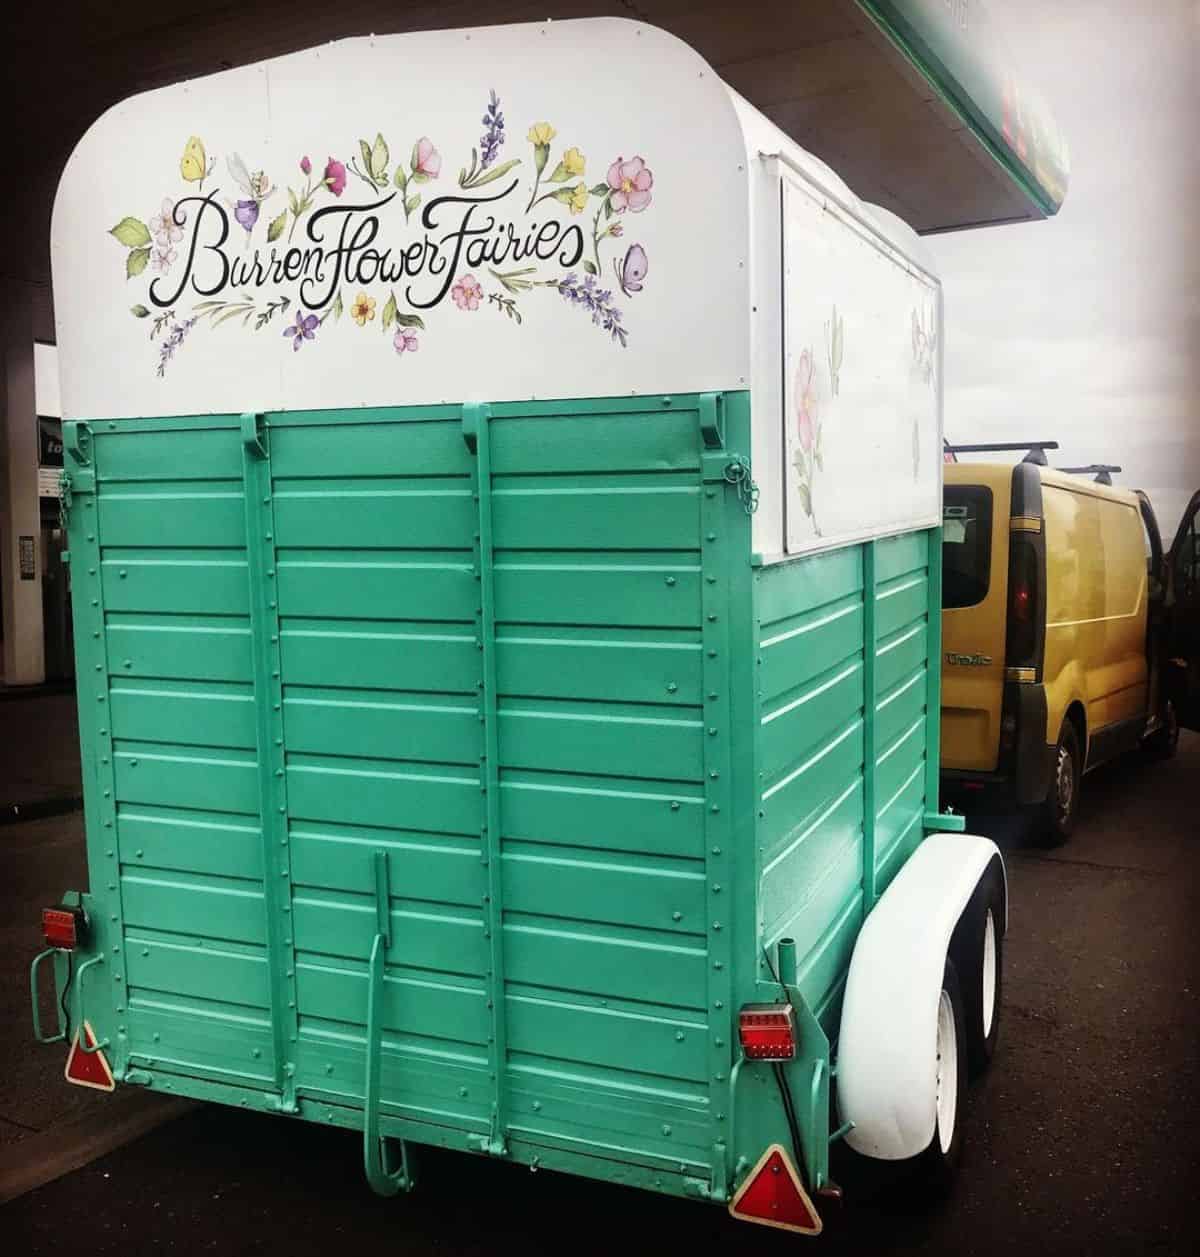 A green horse trailer painted with flower illustrations.